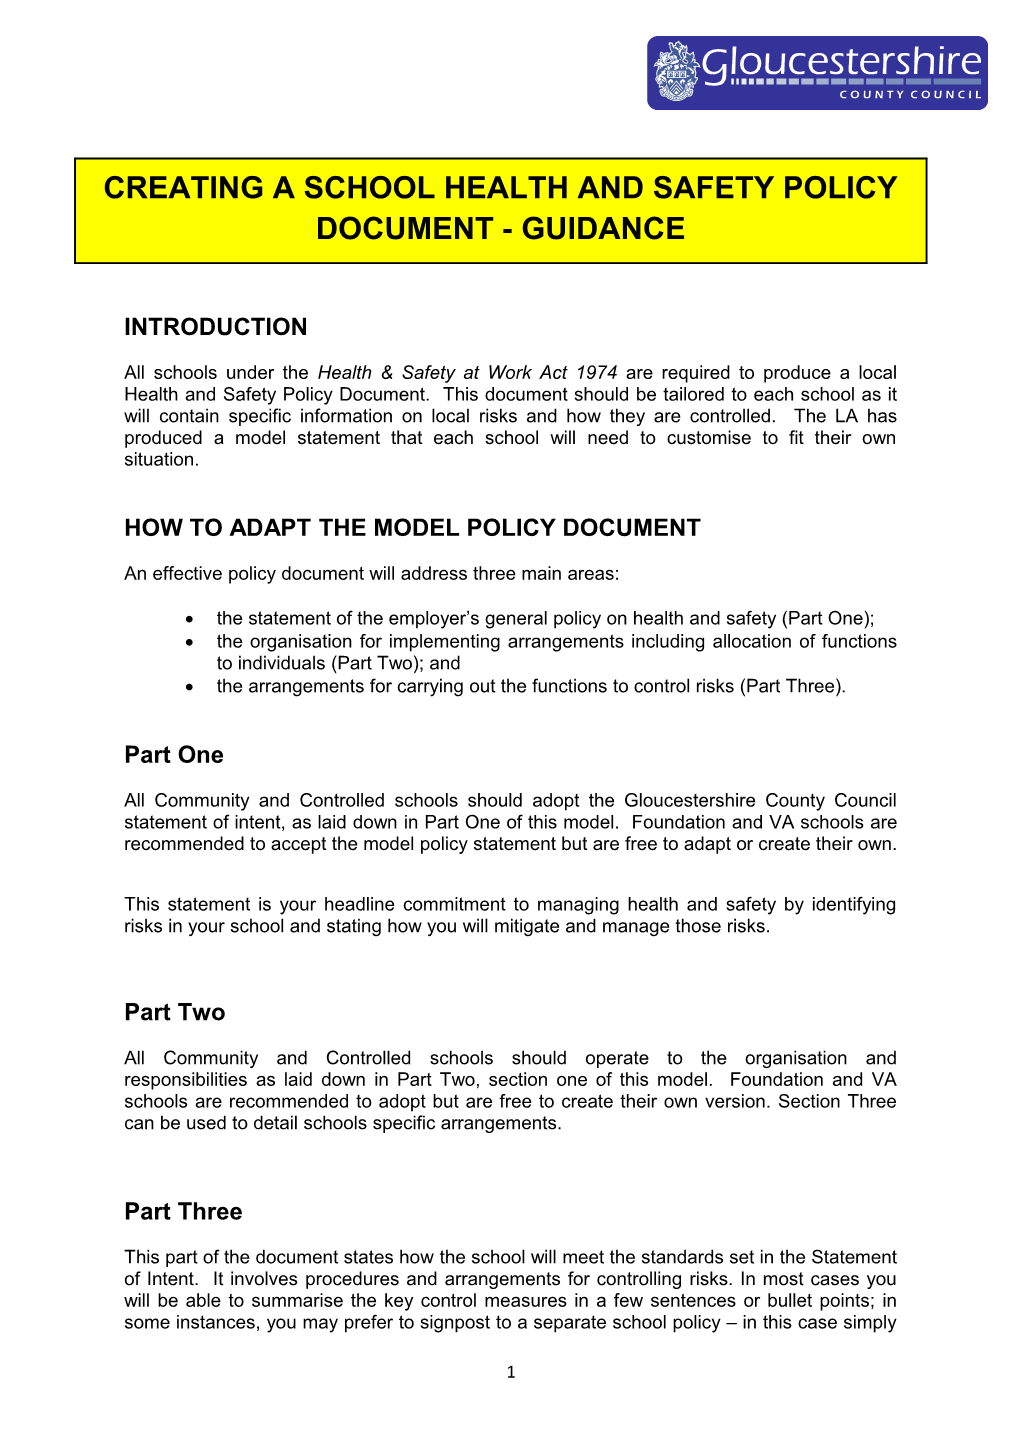 How to Adapt the Model Policy Document